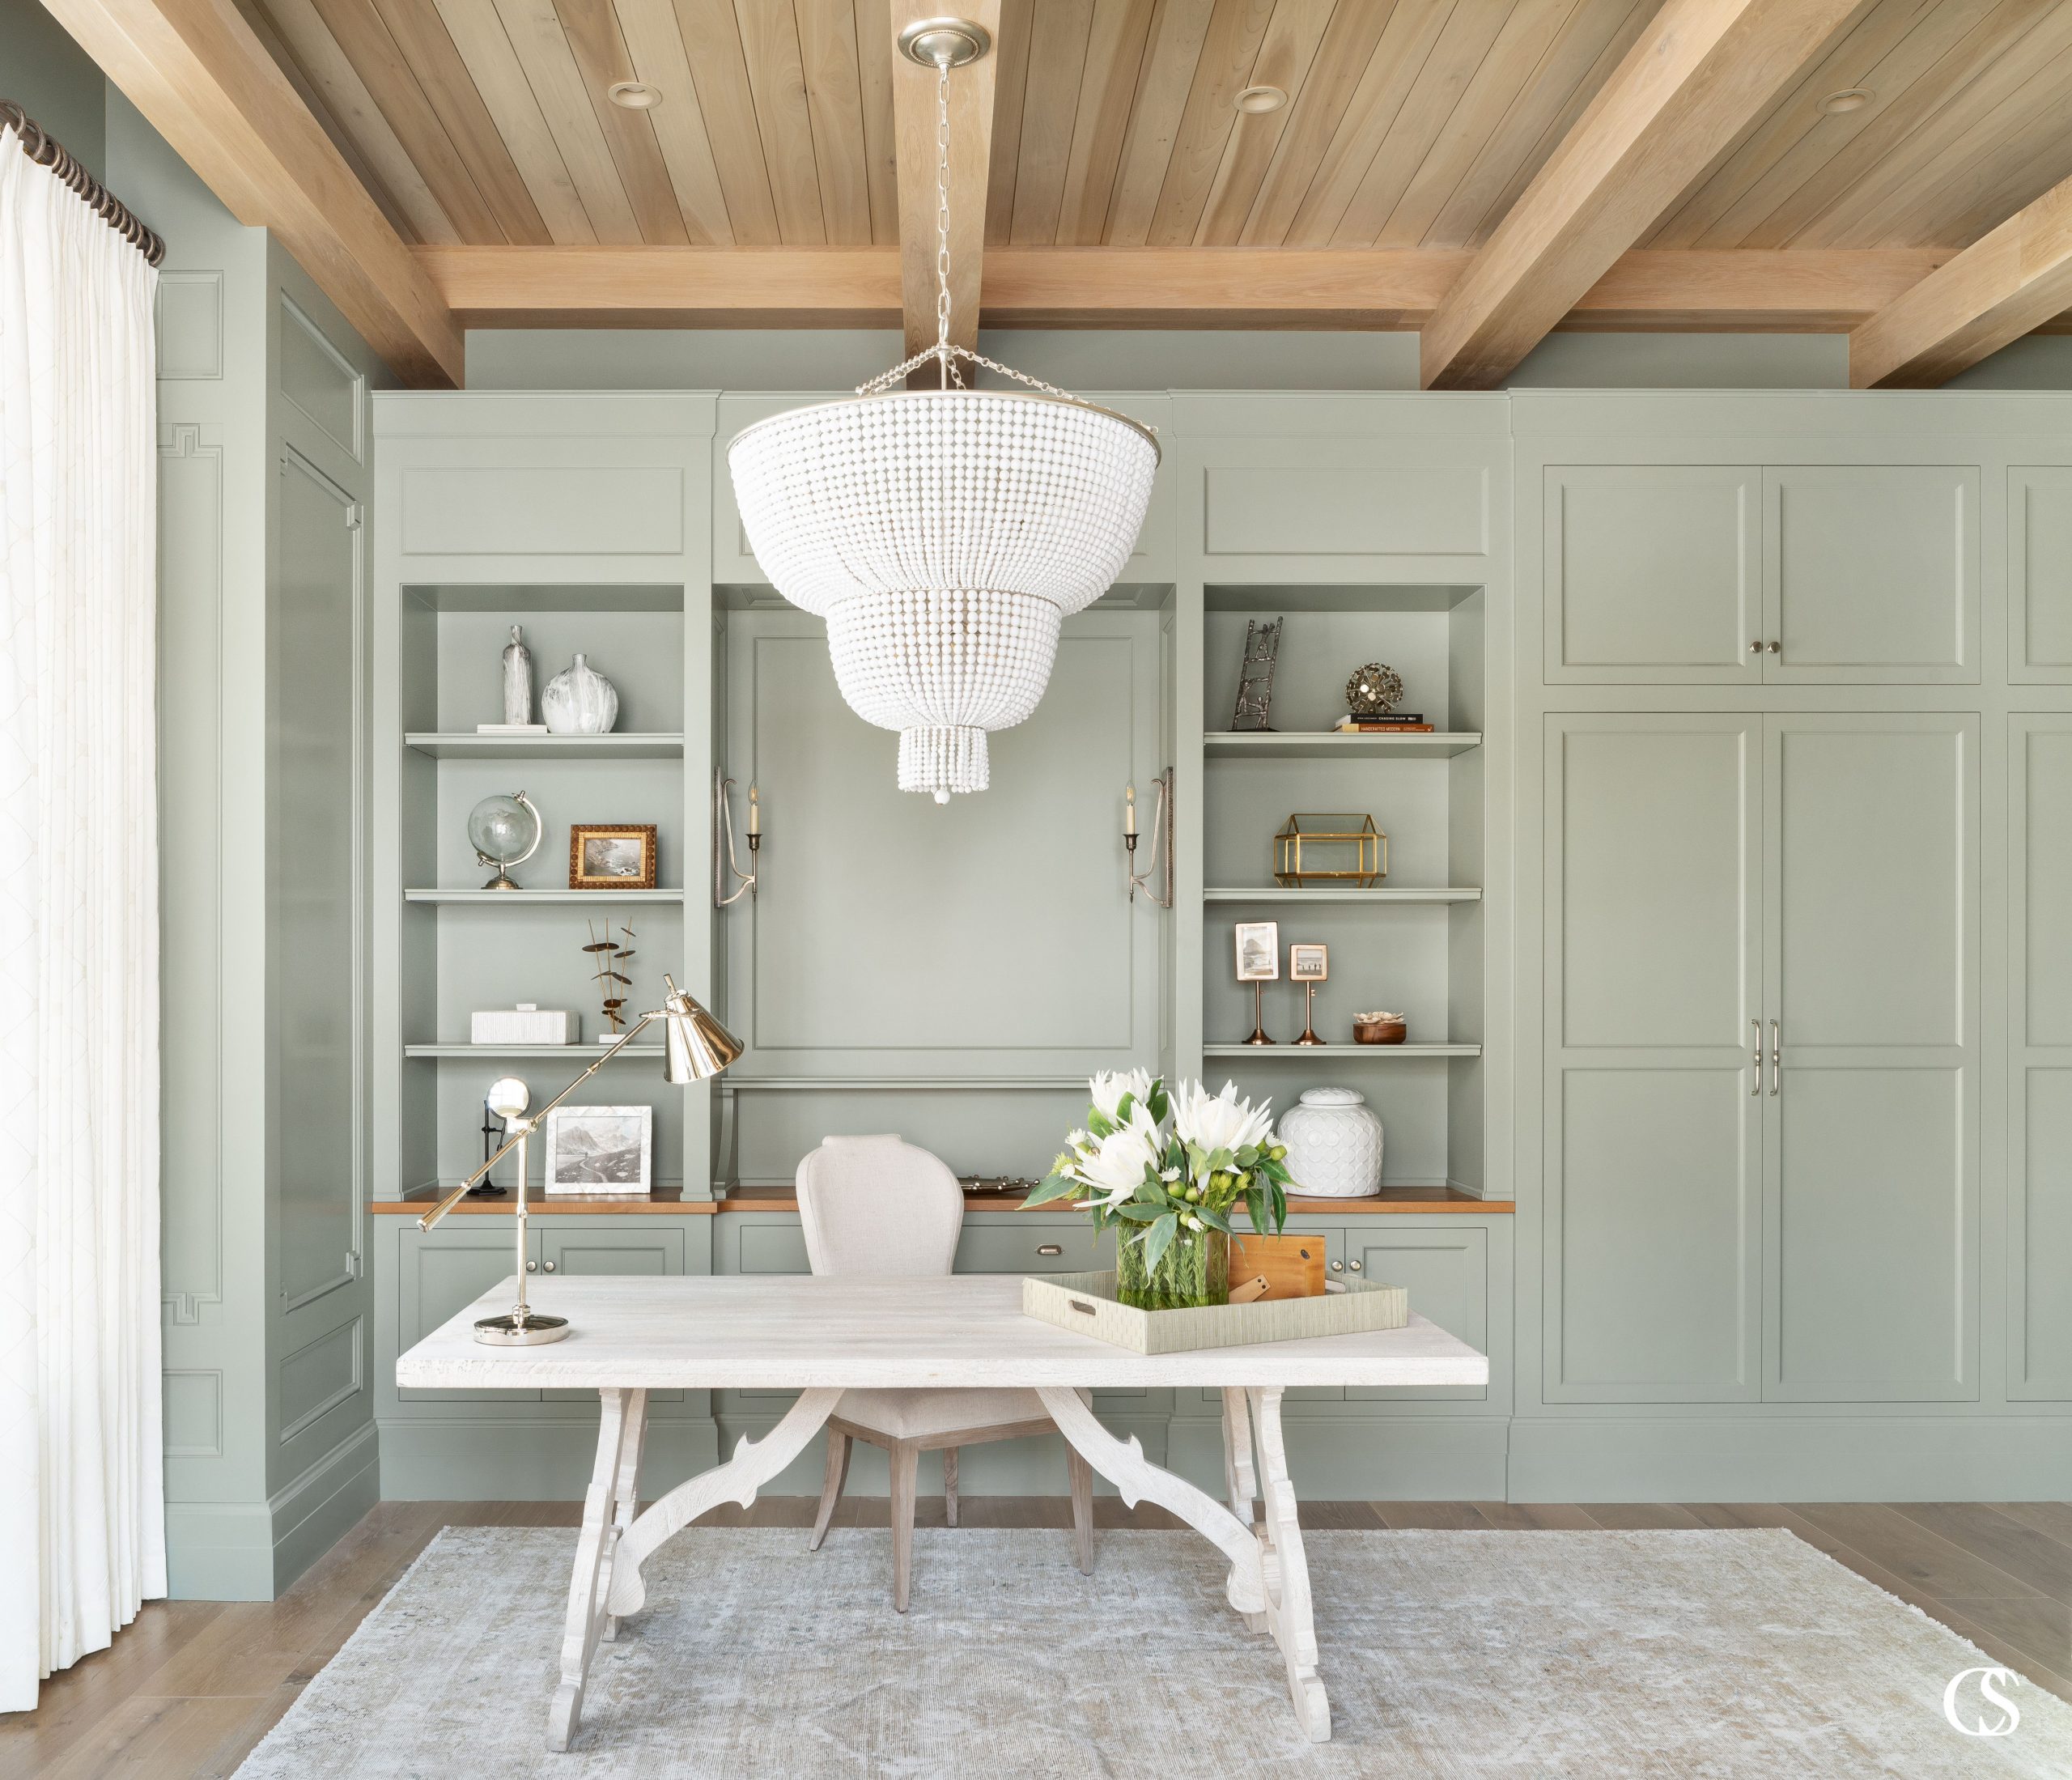 Our Favorite Green Paint Colors - Christopher Scott Cabinetry